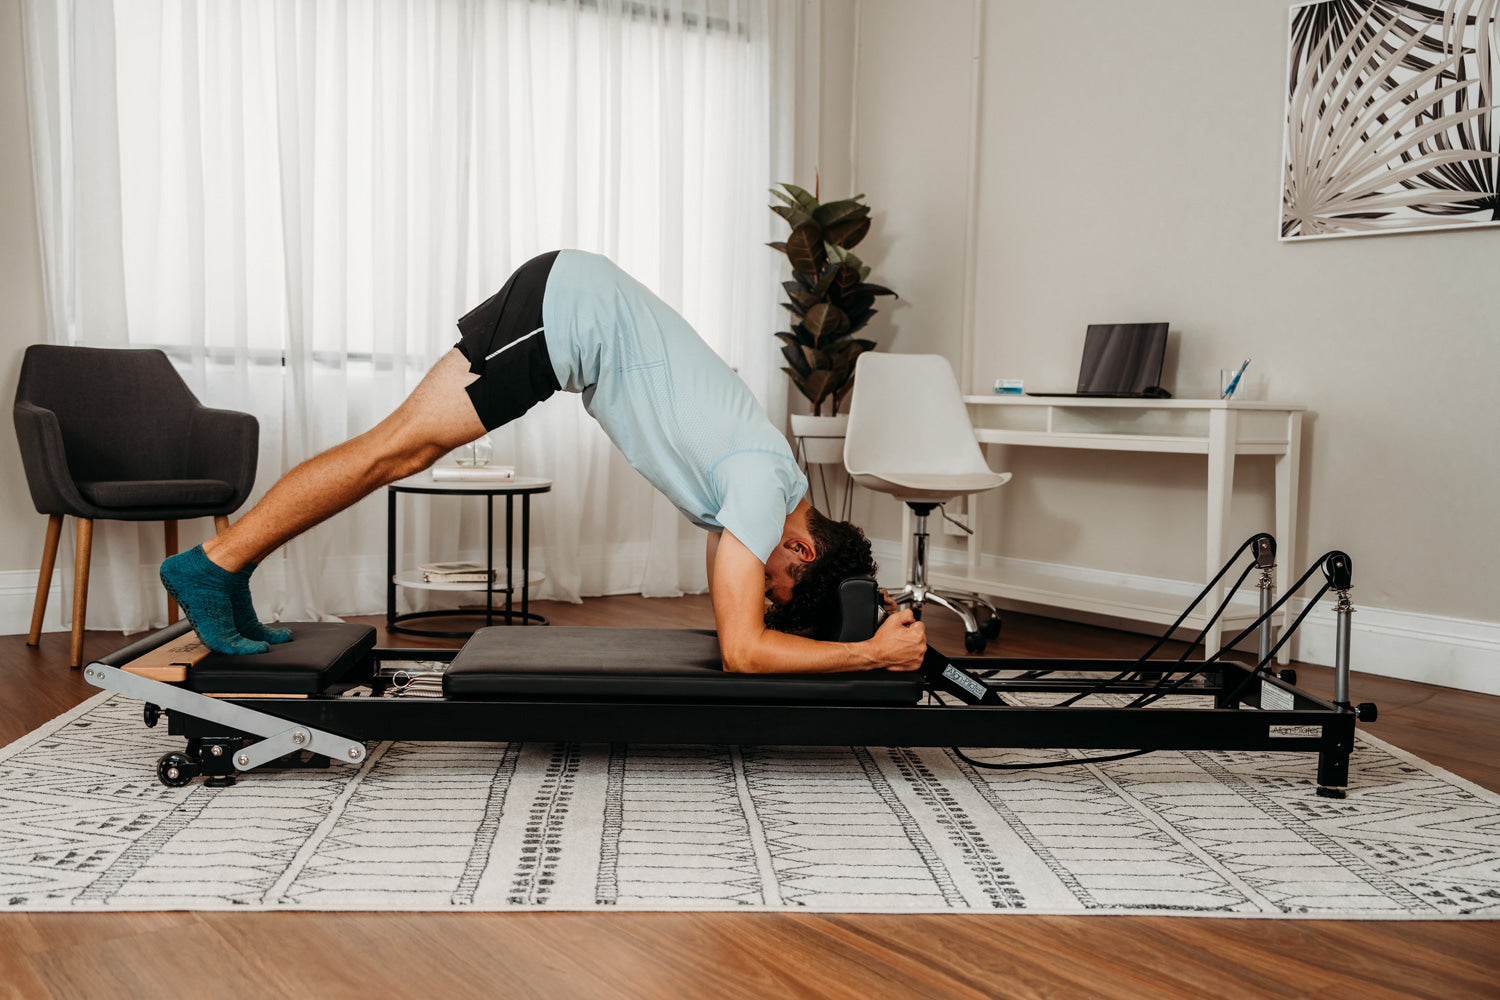 Reformer Pilates: What Is It and How Does It Benefit Your Body?